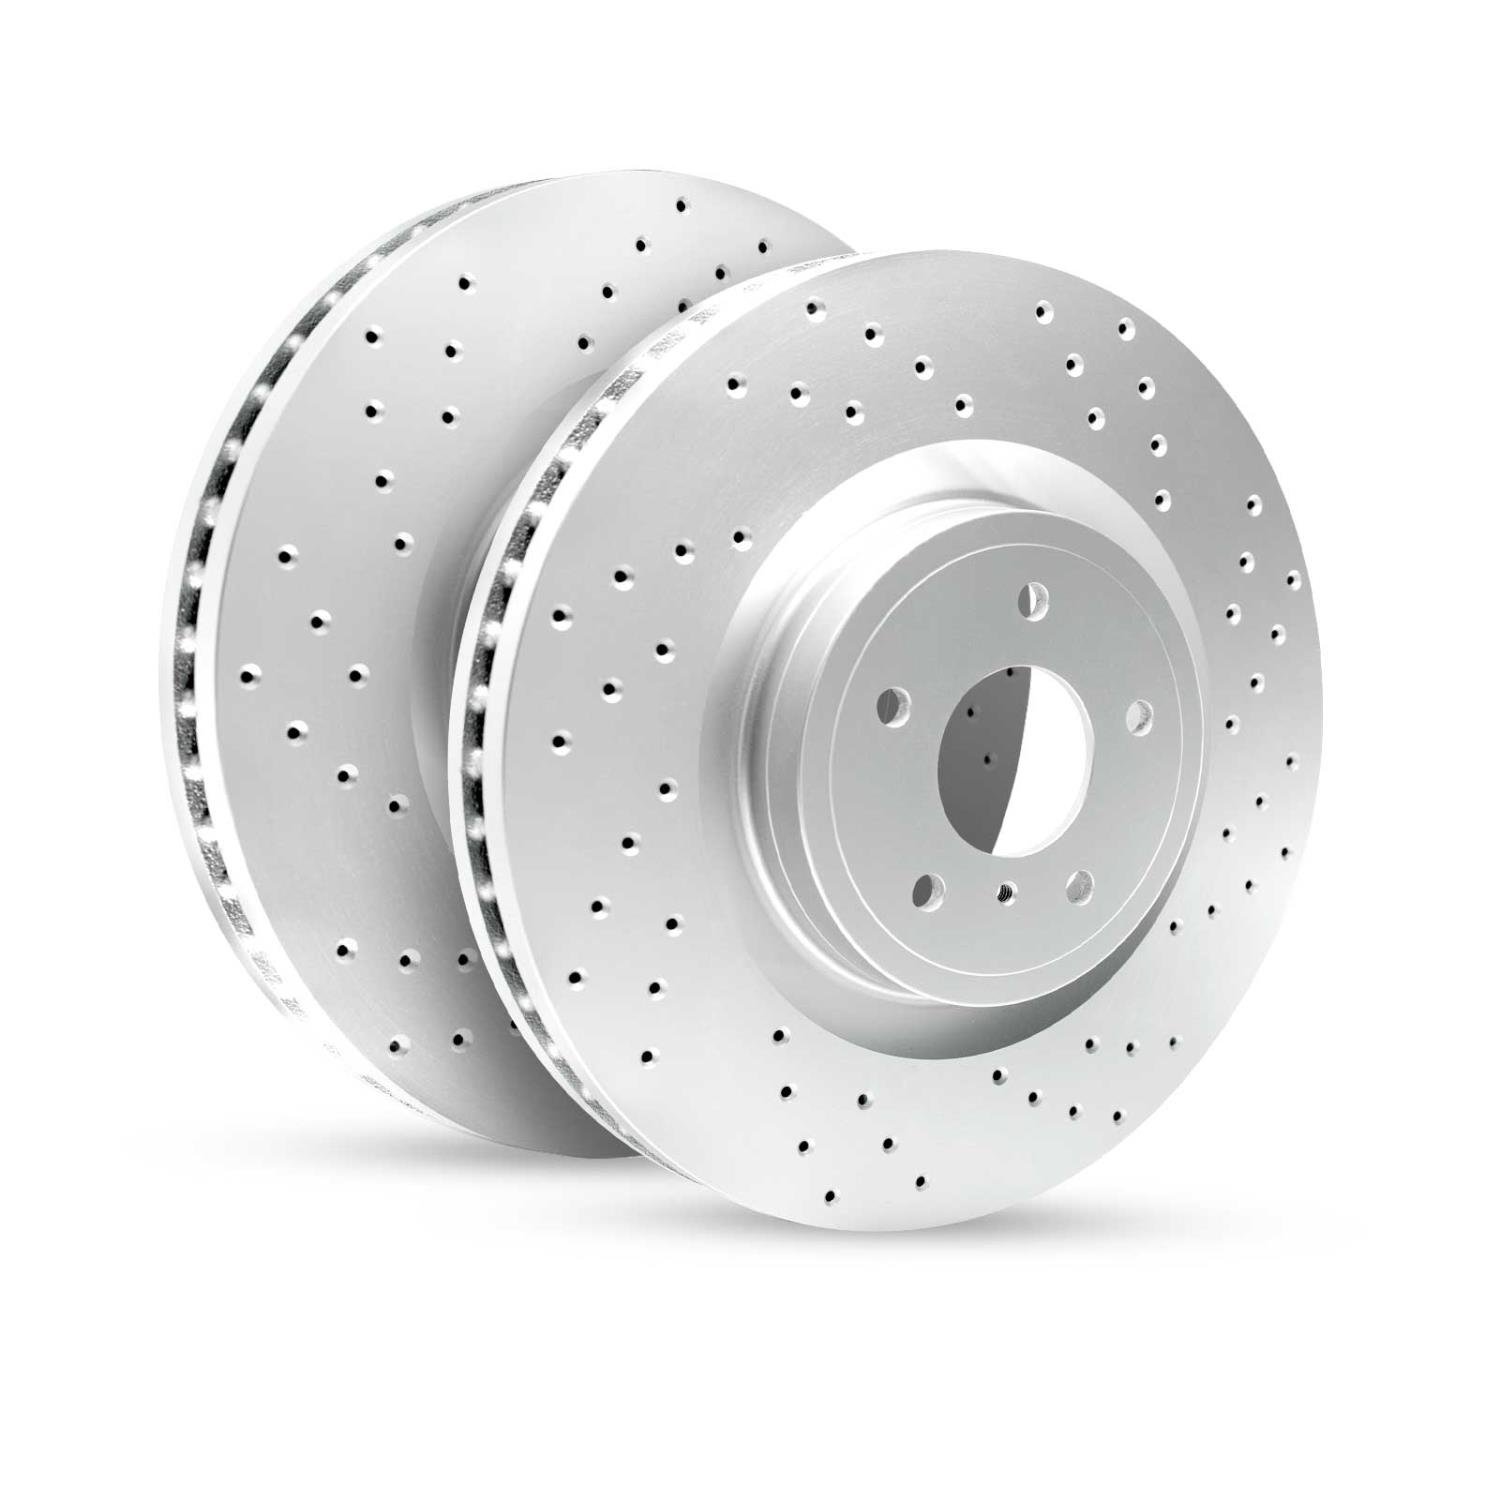 GEO-Carbon Drilled/Slotted Rotors, 2003-2020 Fits Multiple